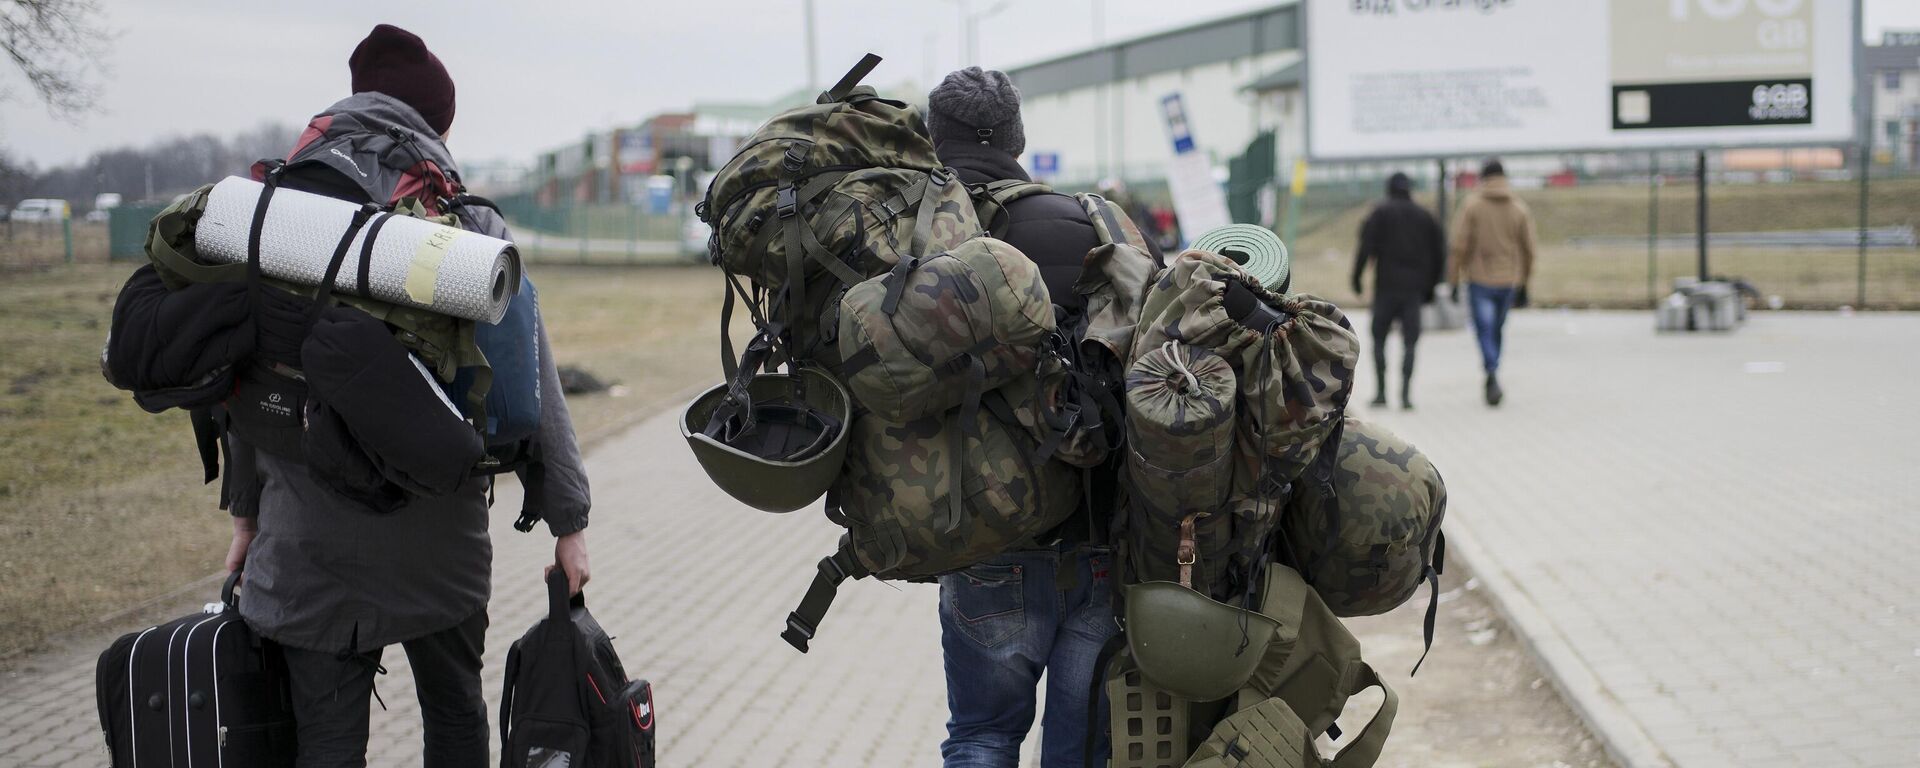 A man carries combat gear as he leaves Poland to fight in Ukraine, at the border crossing in Medyka, Poland, Wednesday, March 2, 2022 - Sputnik International, 1920, 08.06.2022